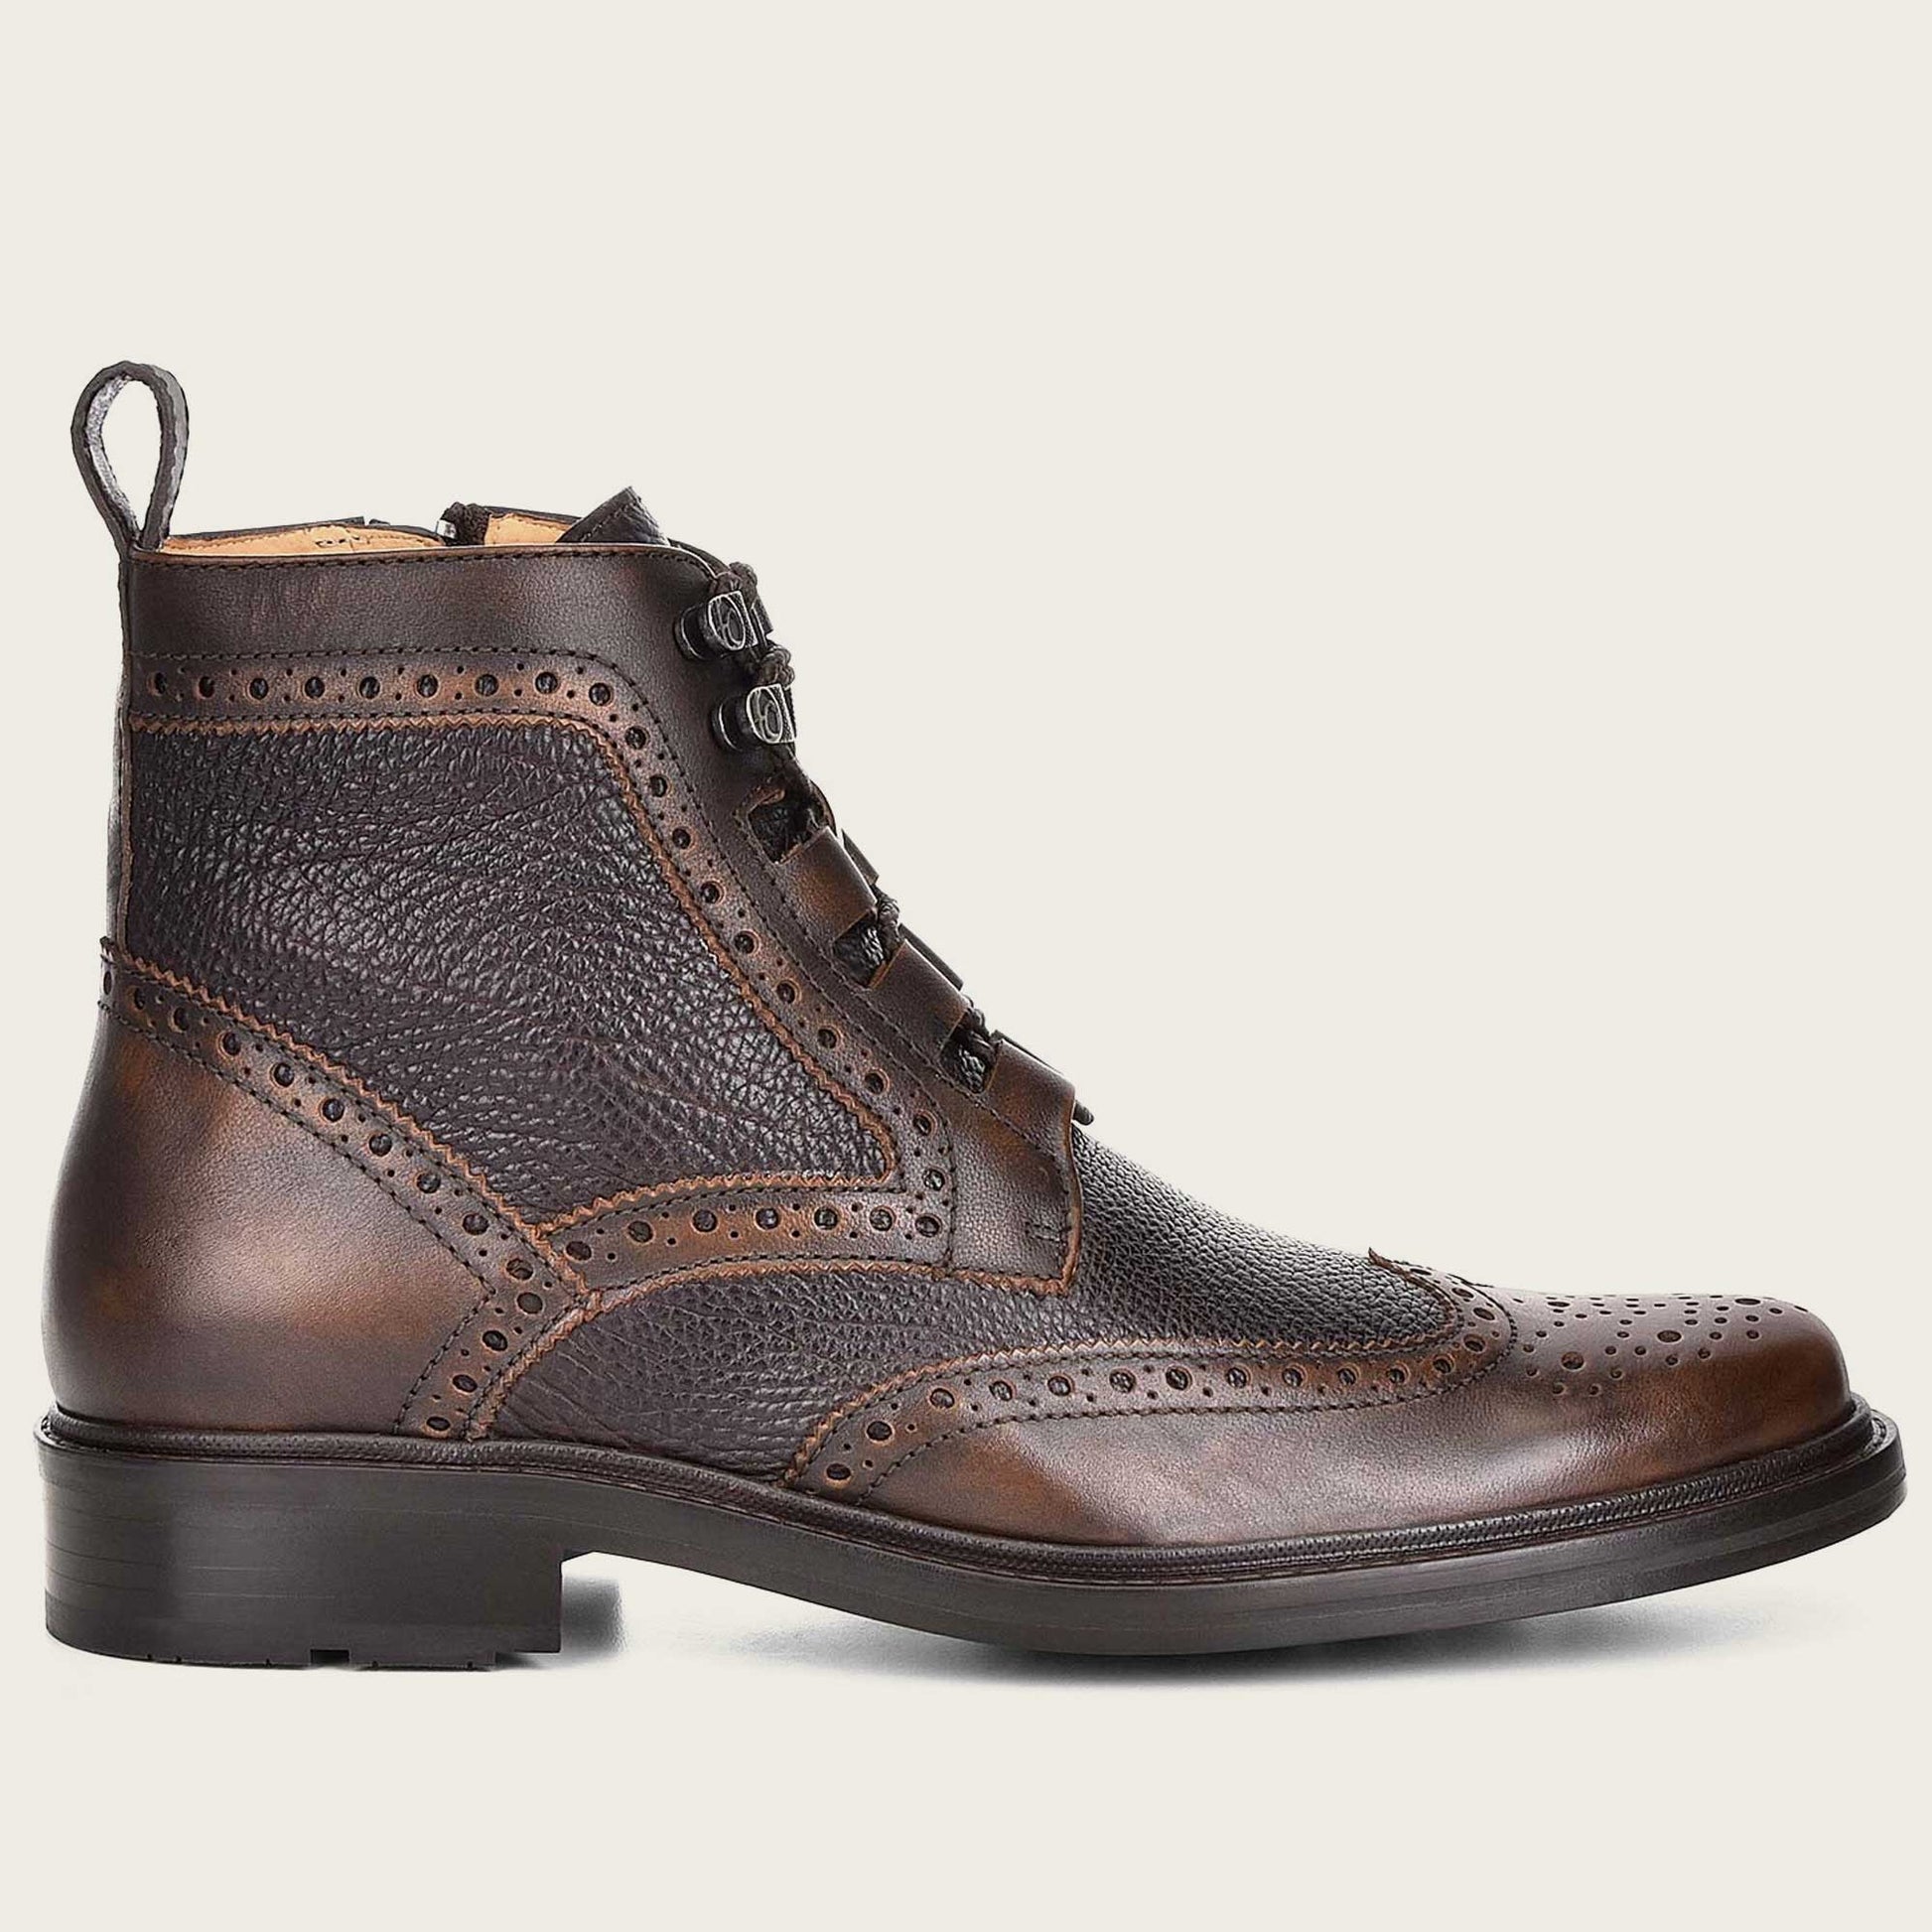 Add a touch of artistry to your wardrobe with this men's hand-painted brown bi-tone leather boot. The intricate brush strokes and color gradations create a one-of-a-kind masterpiece for your feet.